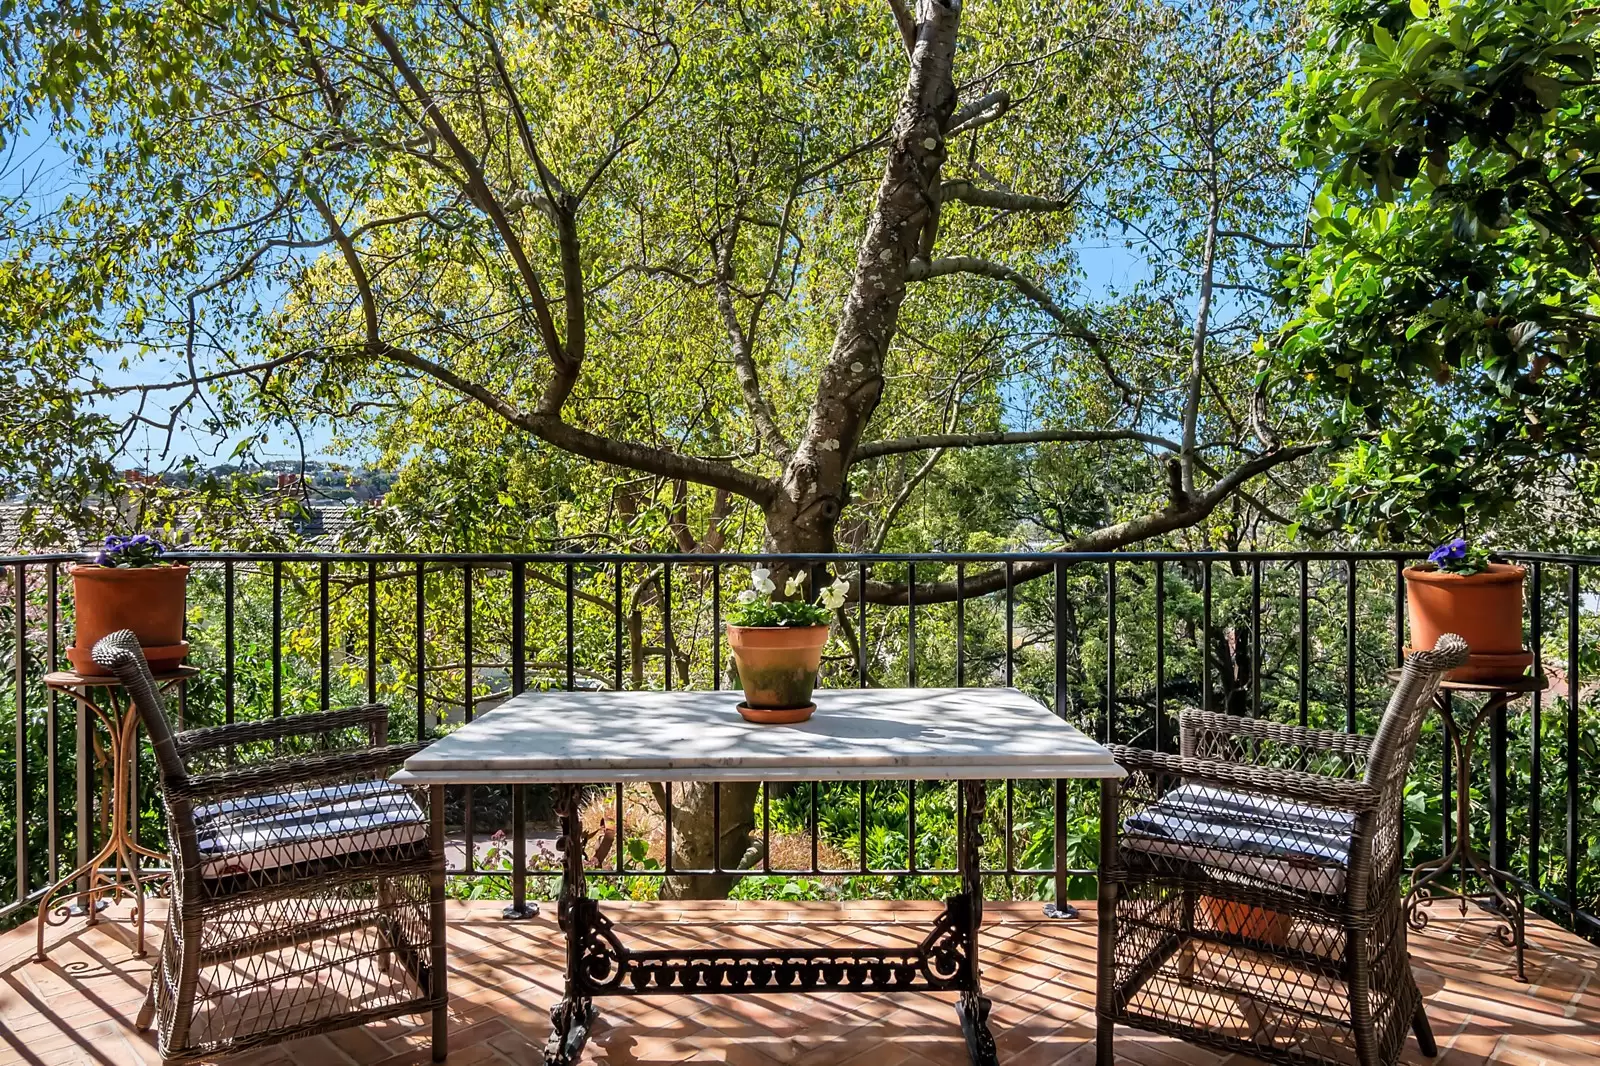 4 Roslyndale Avenue, Woollahra Sold by Sydney Sotheby's International Realty - image 1